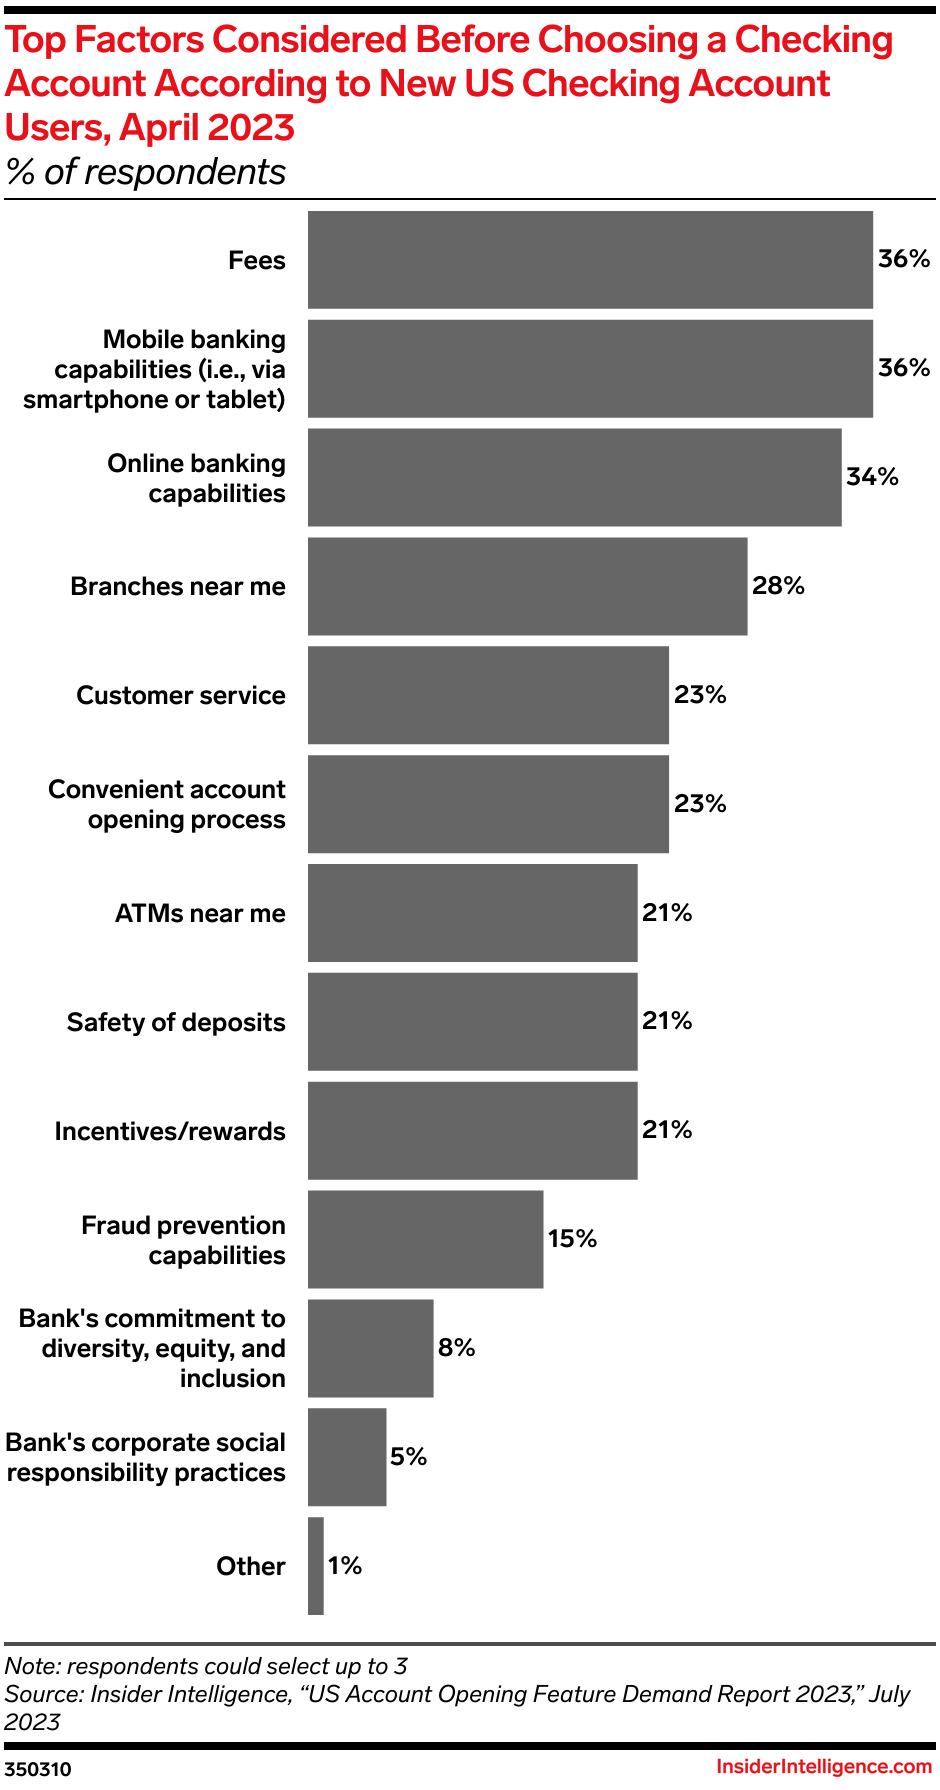 Top Factors Considered Before Choosing a Checking Account According to New US Checking Account Users, April 2023 (% of respondents)